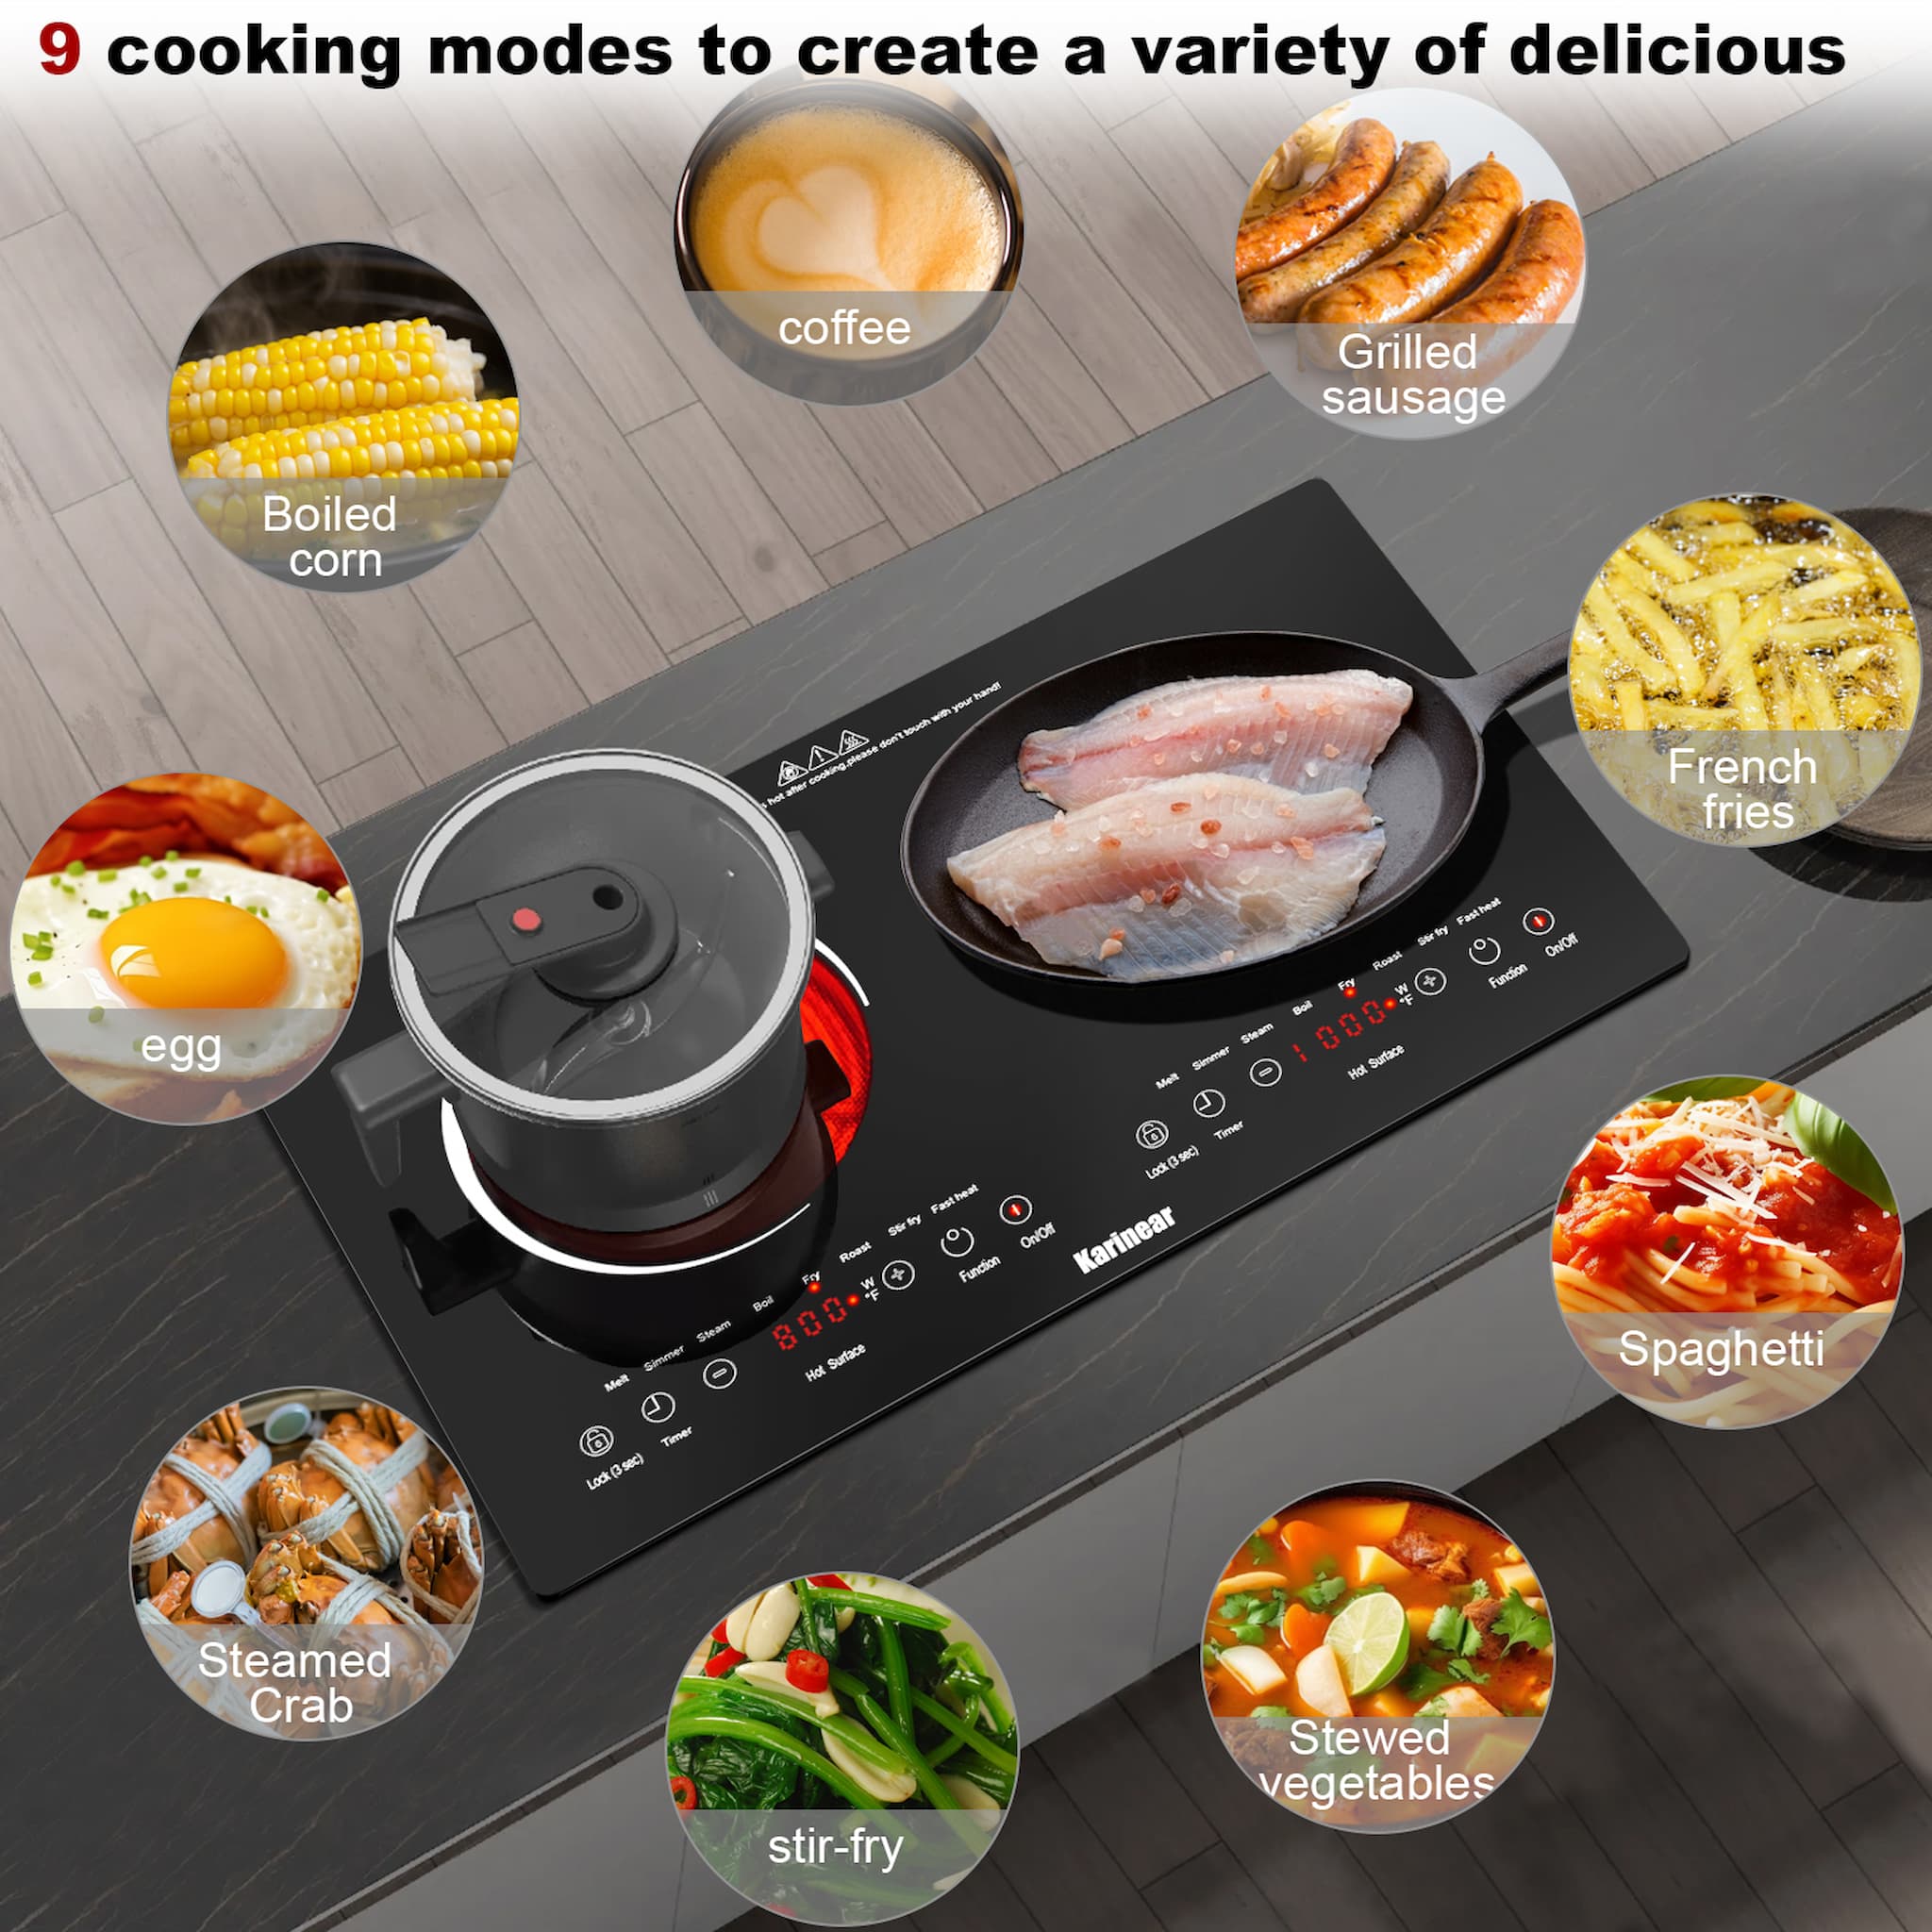 he heating area adopts high-efficiency electric heating technology, with fast heating speed and remarkable energy-saving effect. There are 5 burner that you can use them simultaneously to complete the cooking.